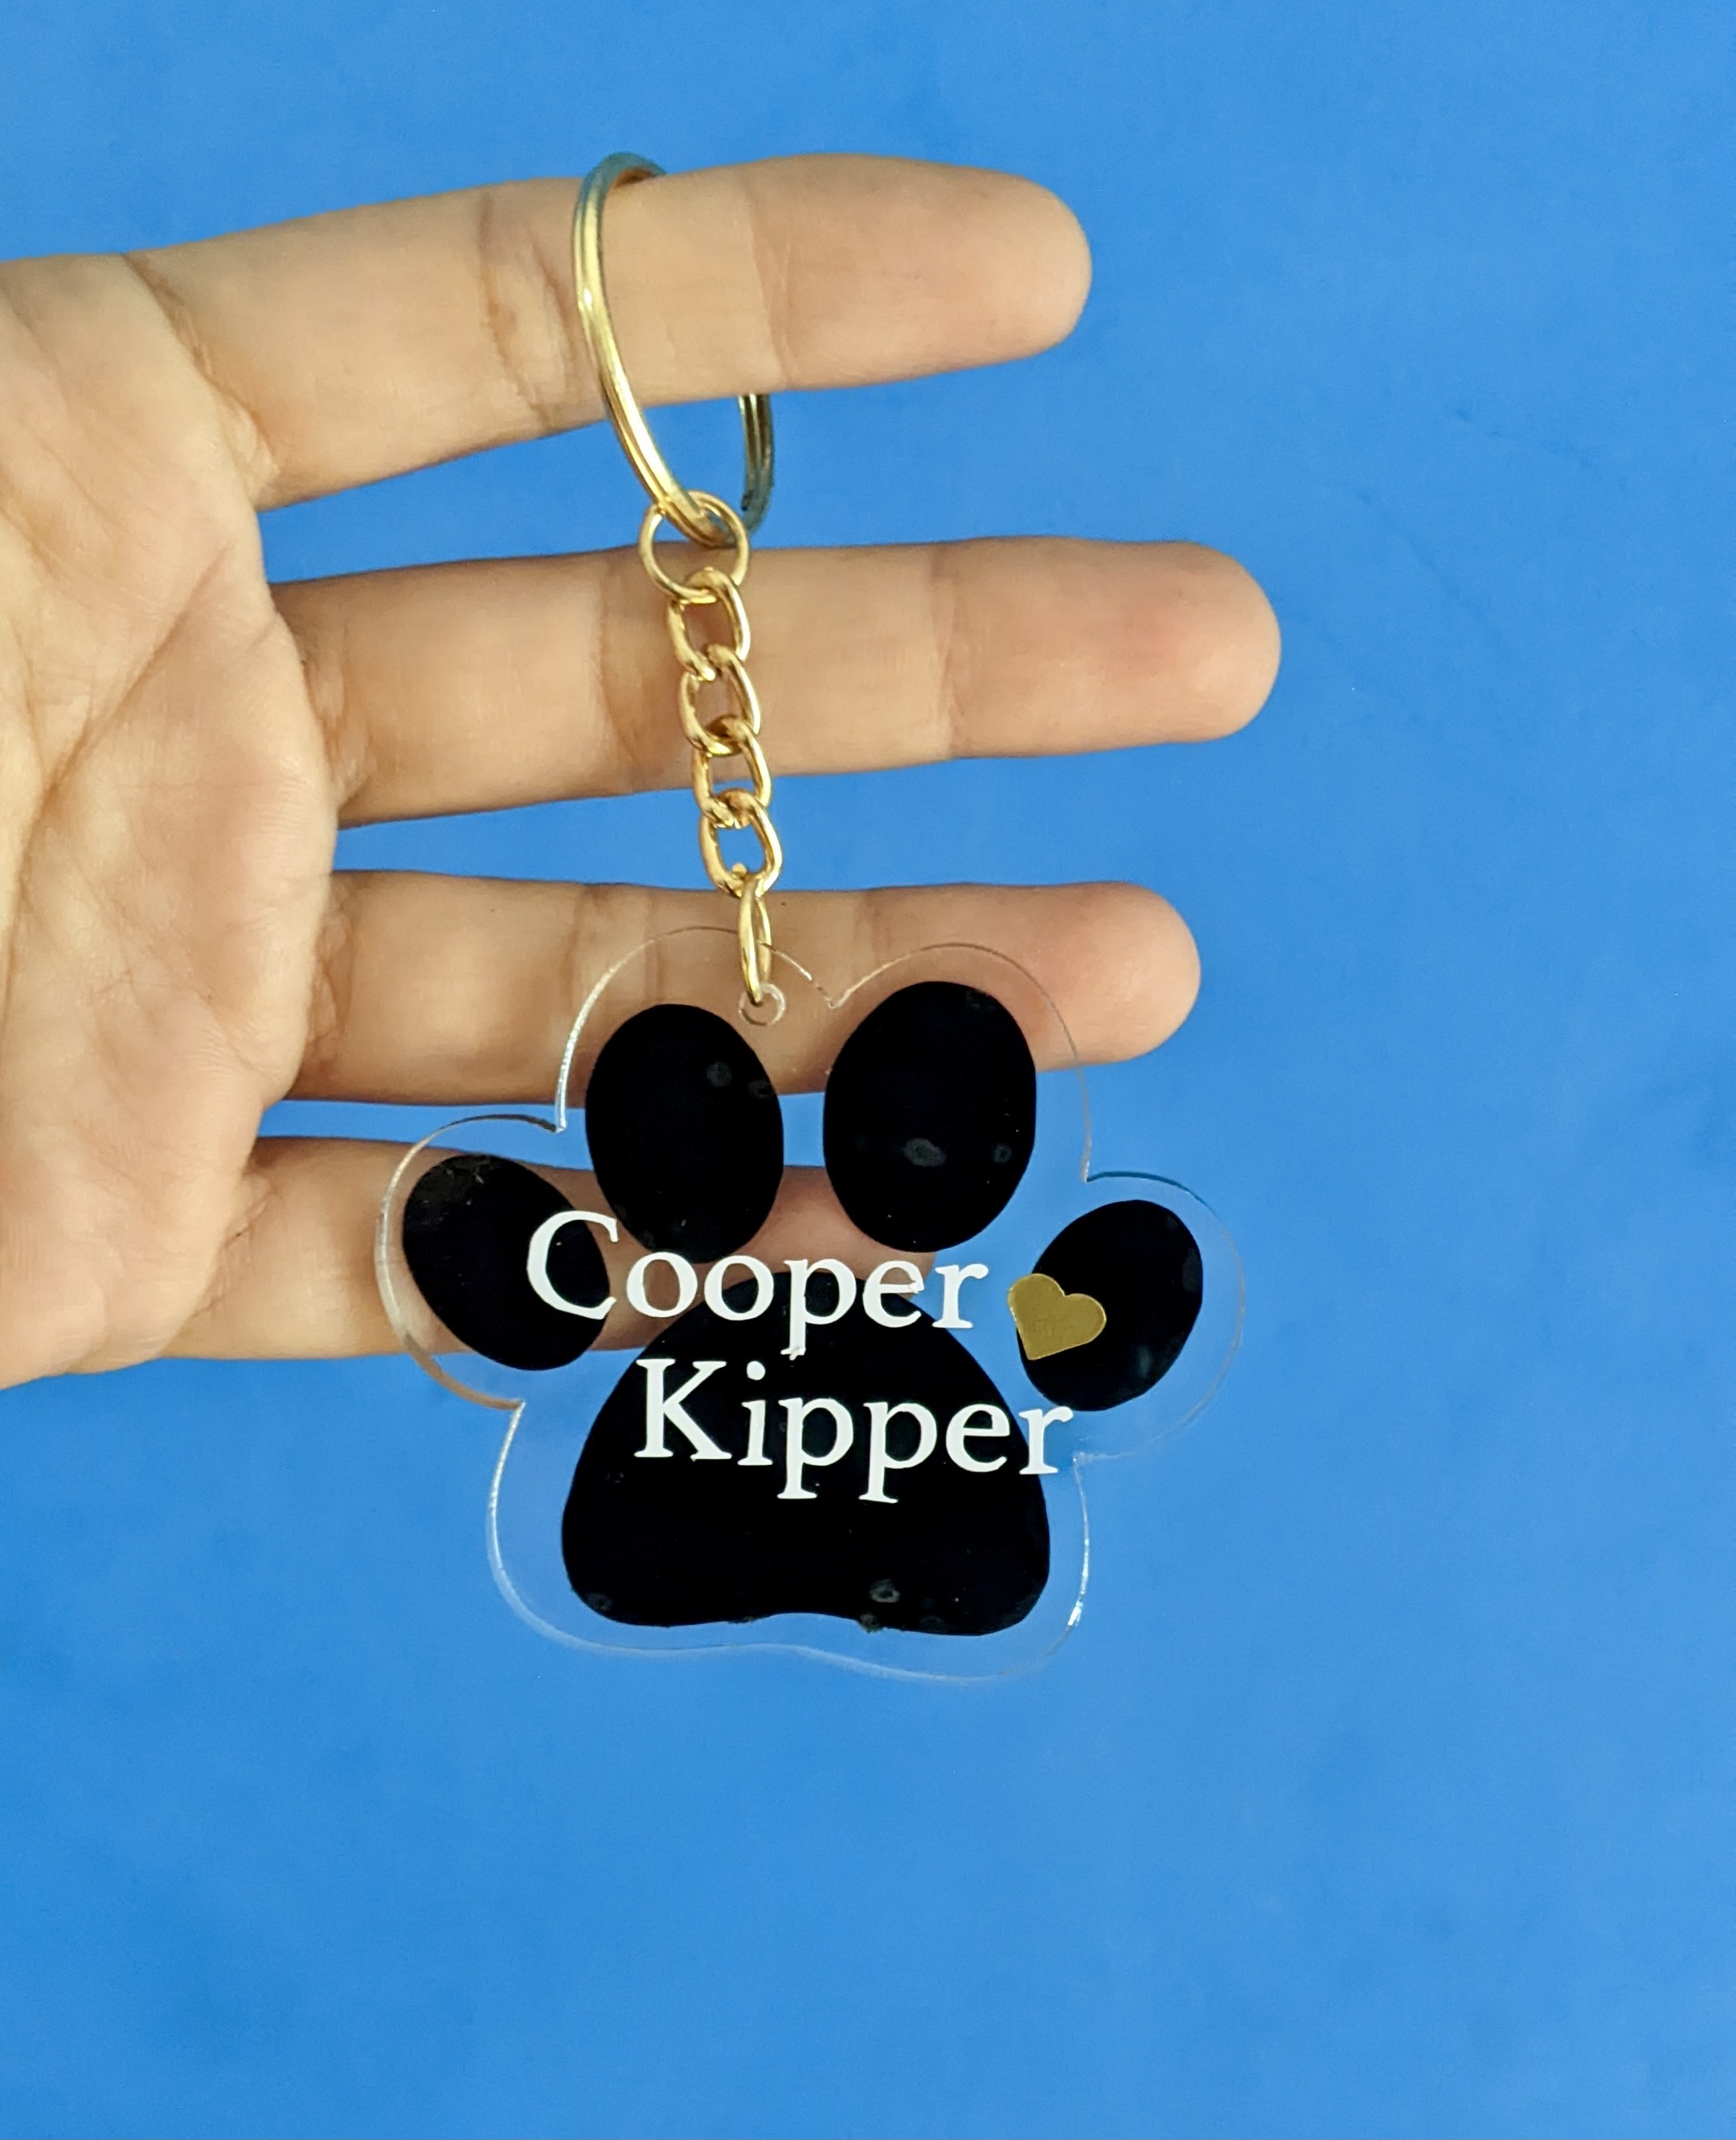 Pet paws and name on the keychain for hanging keys